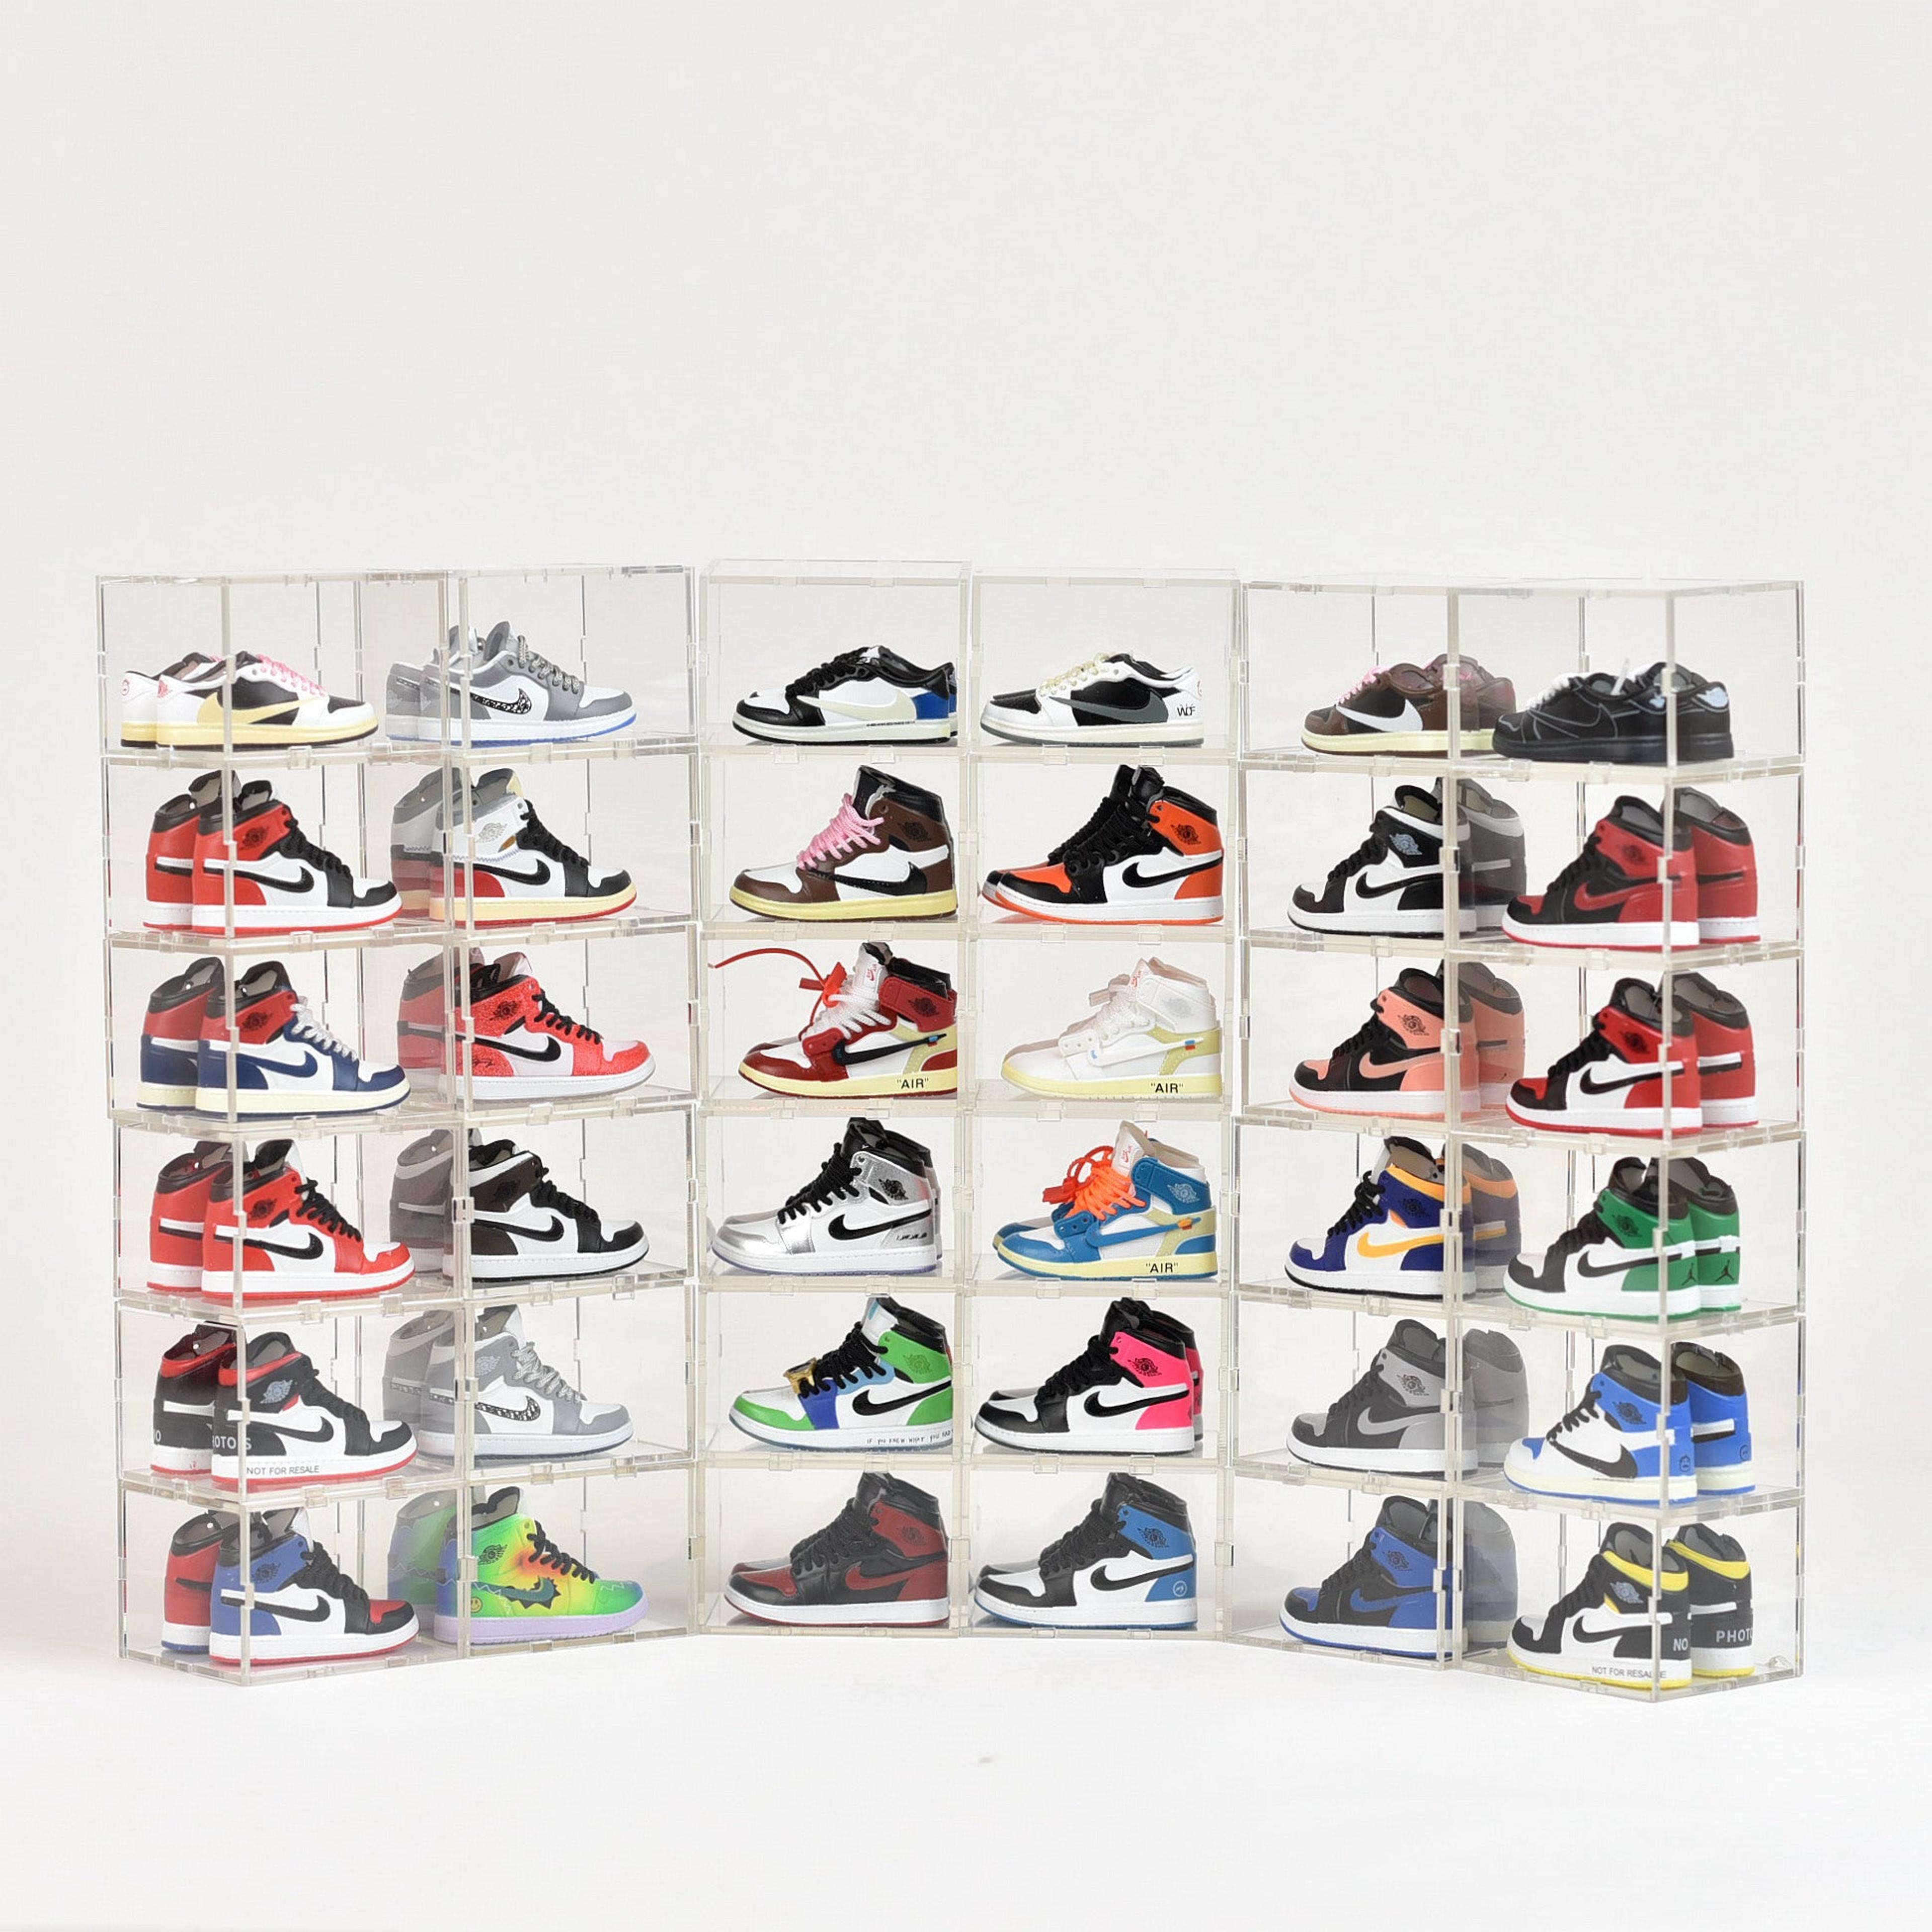 Alternate View 1 of AJ1 Mini Sneakers Collection with Display Case